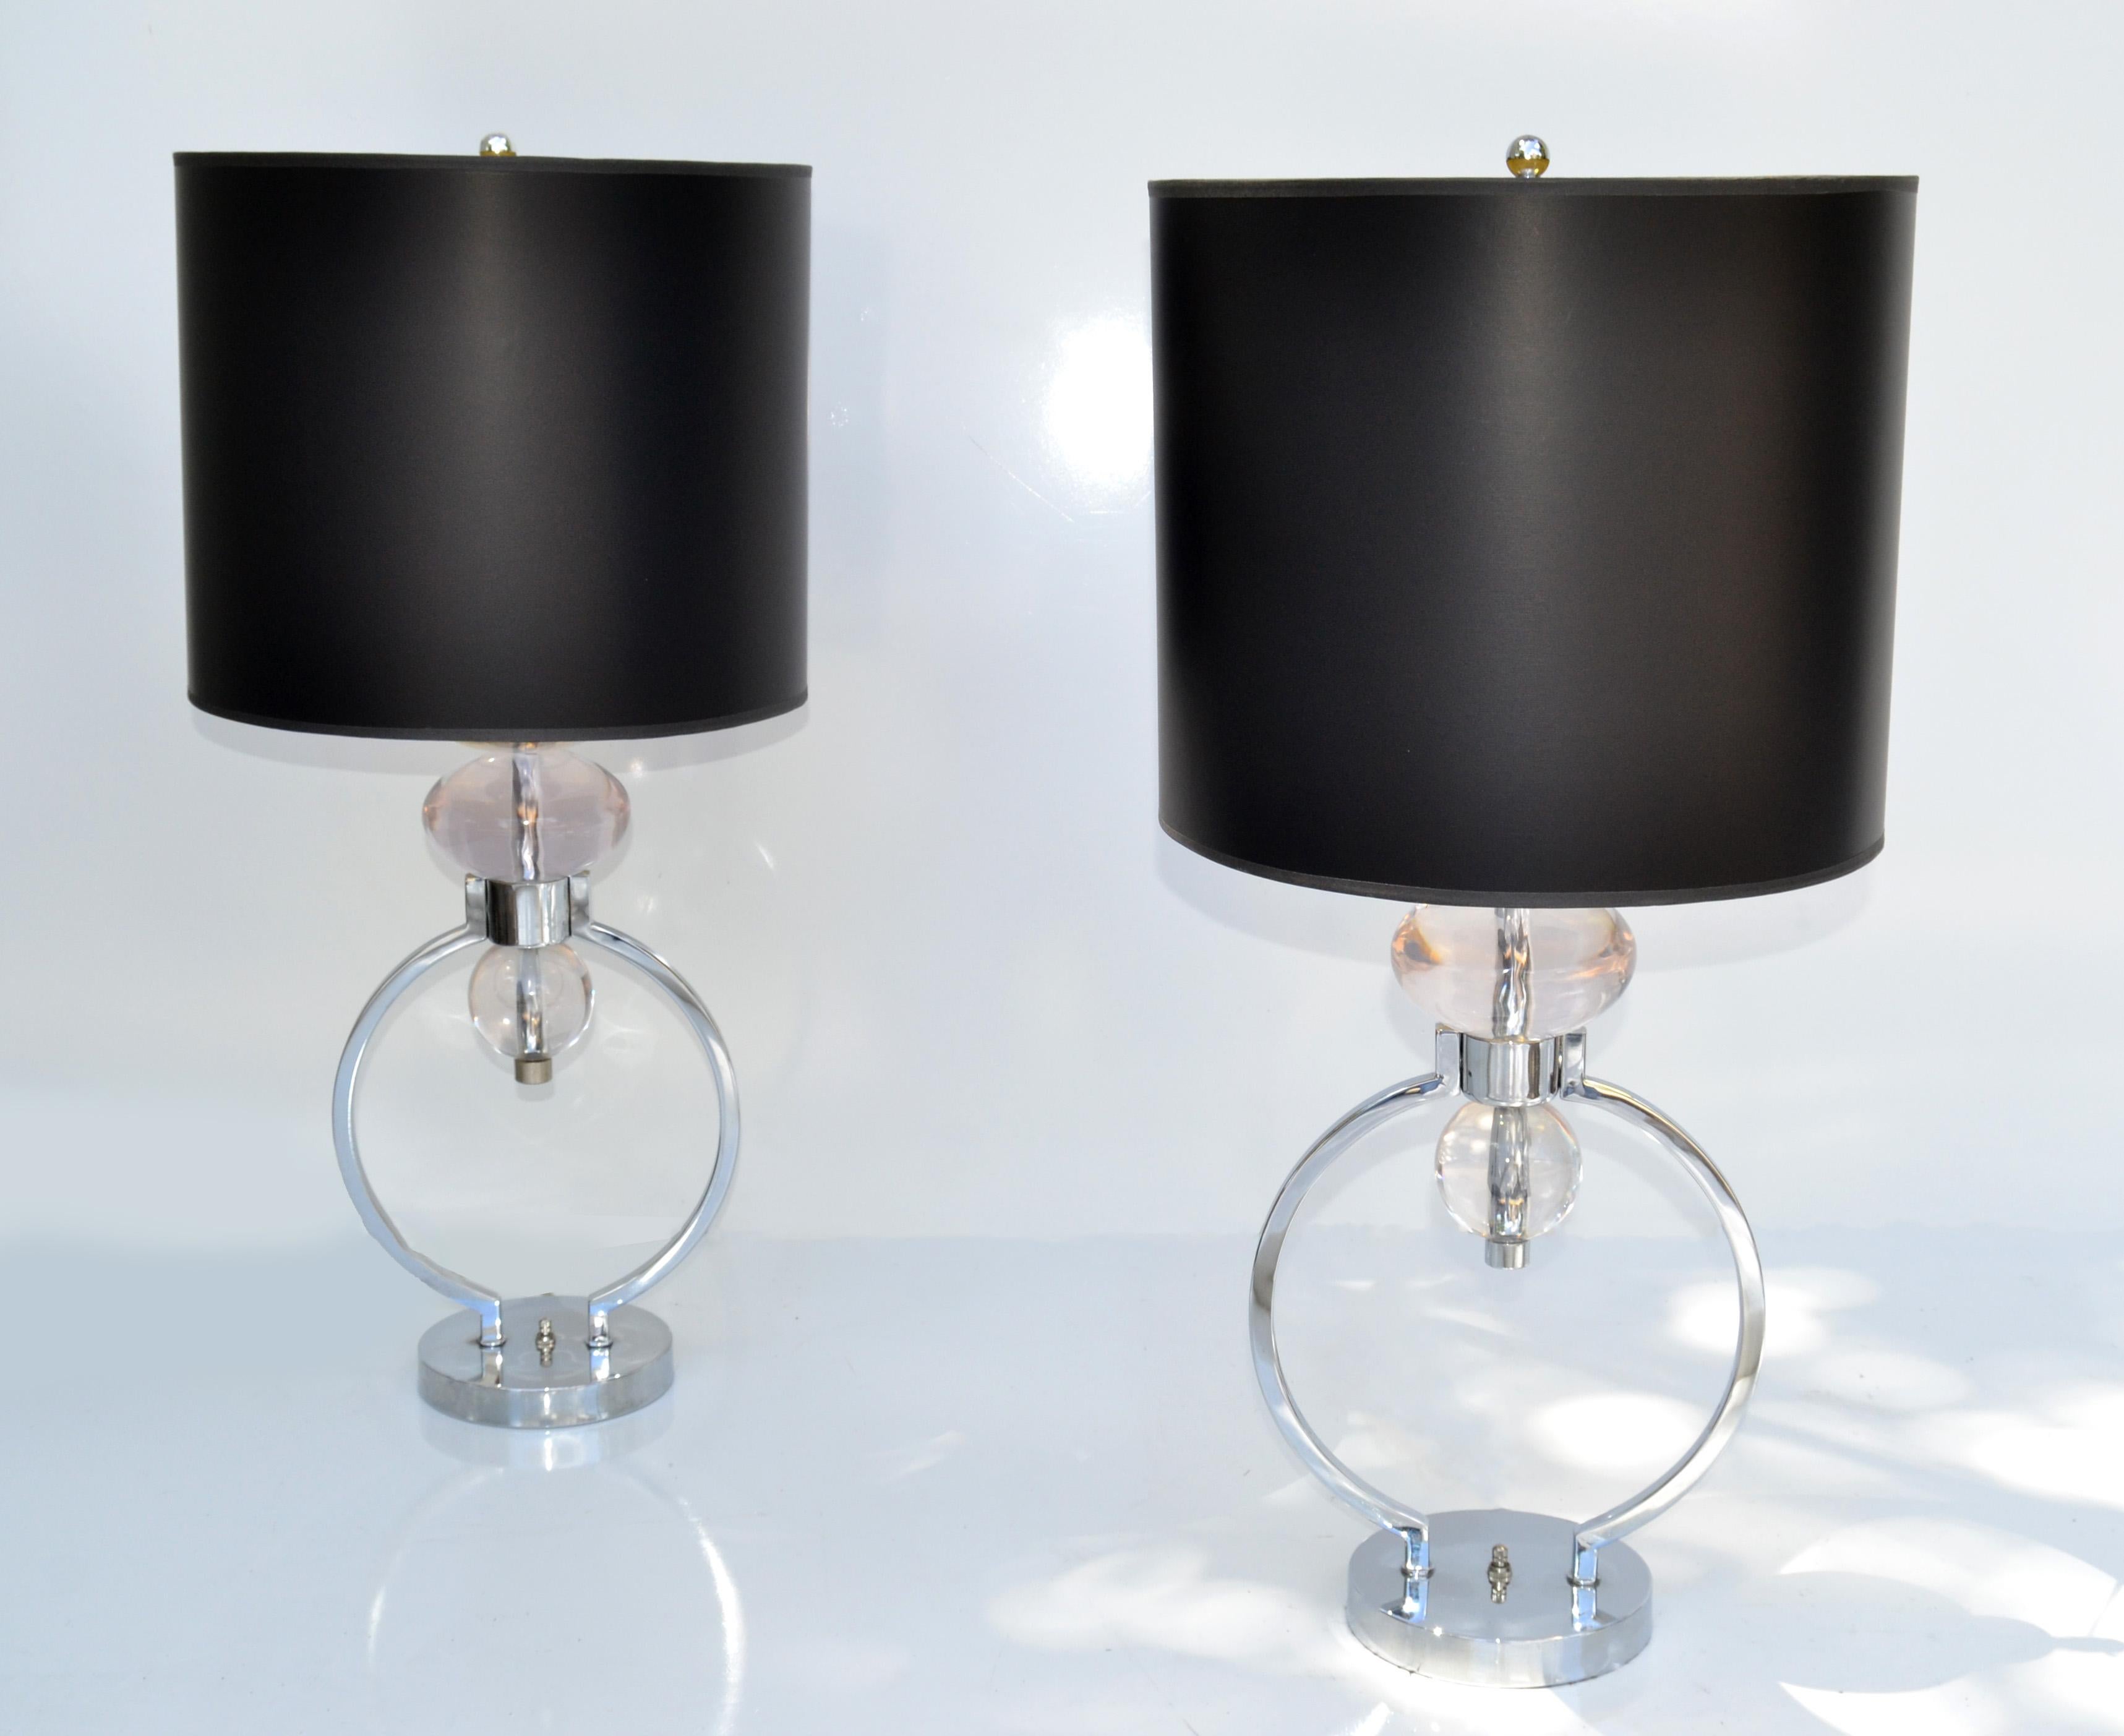 Pair of Van Teal Mid-Century Modern transparent geometric shaped Lucite pieces stacked table lamps with circle Chrome Core.
Come with harps and black & gold paper drum shades.
US wired, UL Listed and in working condition takes 1 regular Light Bulb